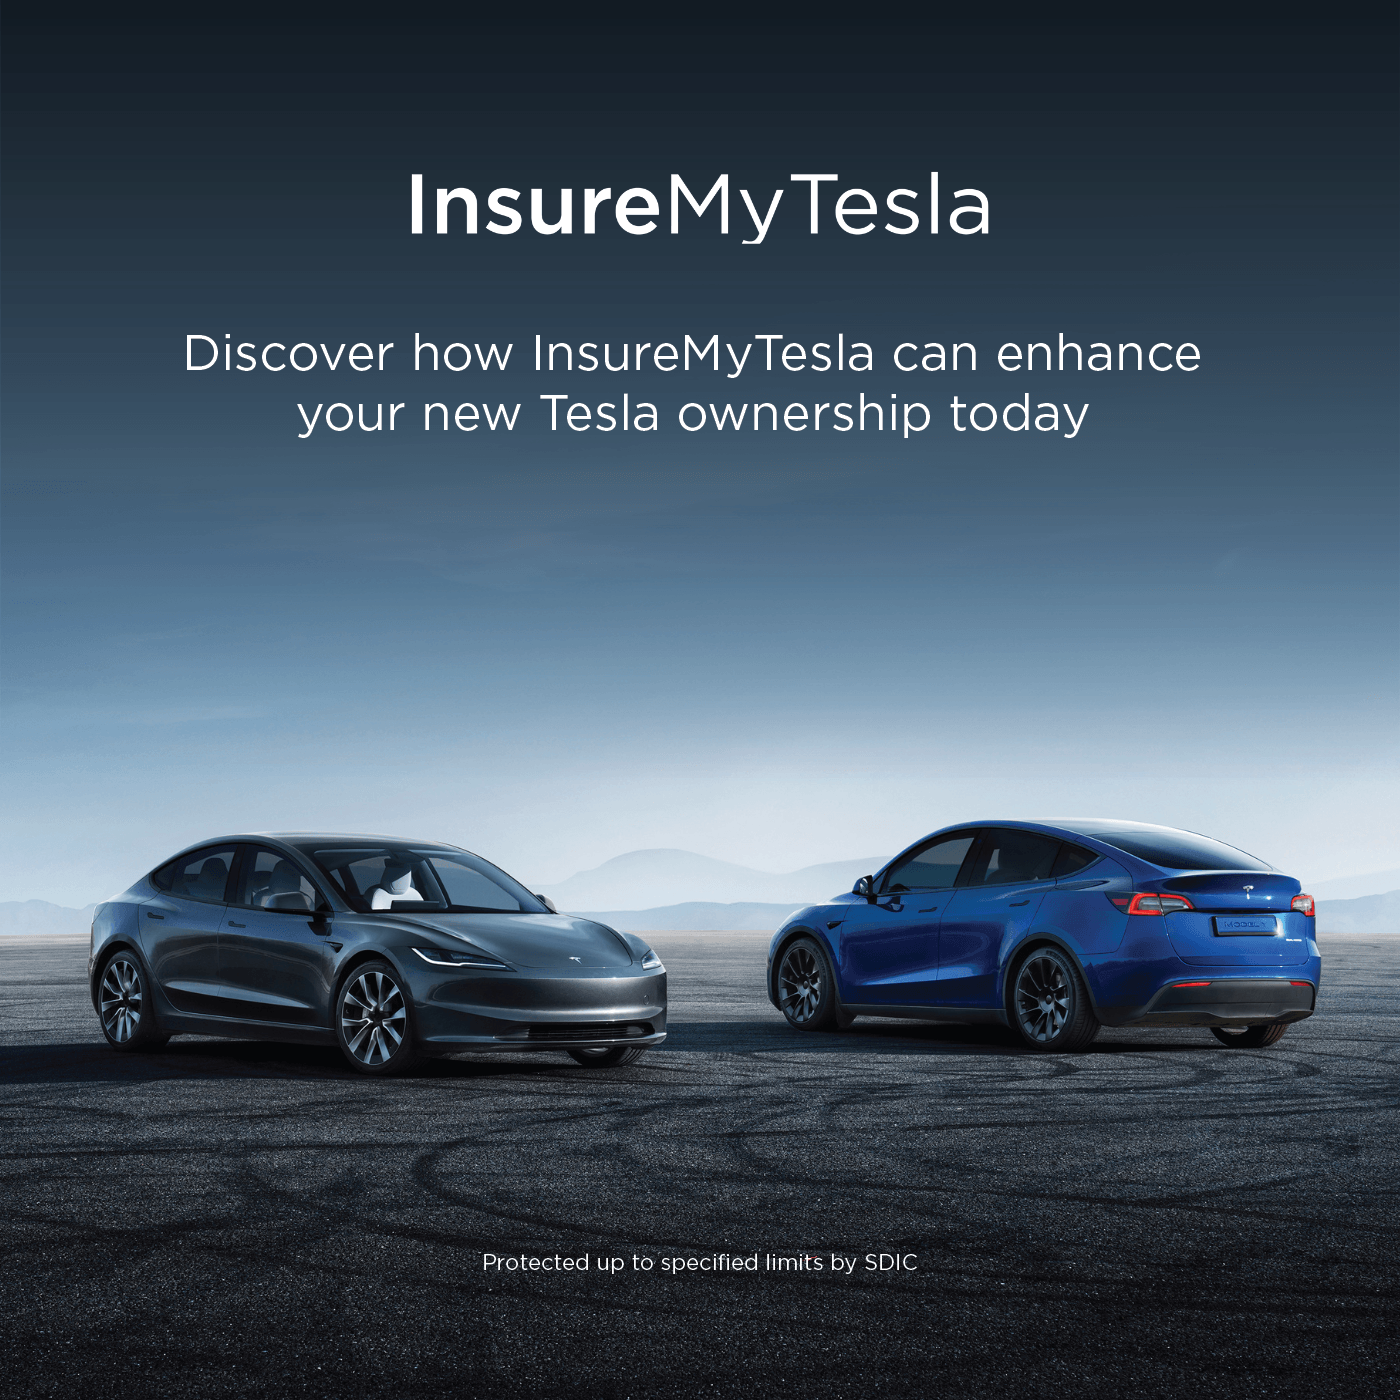 Discover how InsureMyTesla can enhance your Tesla ownership today